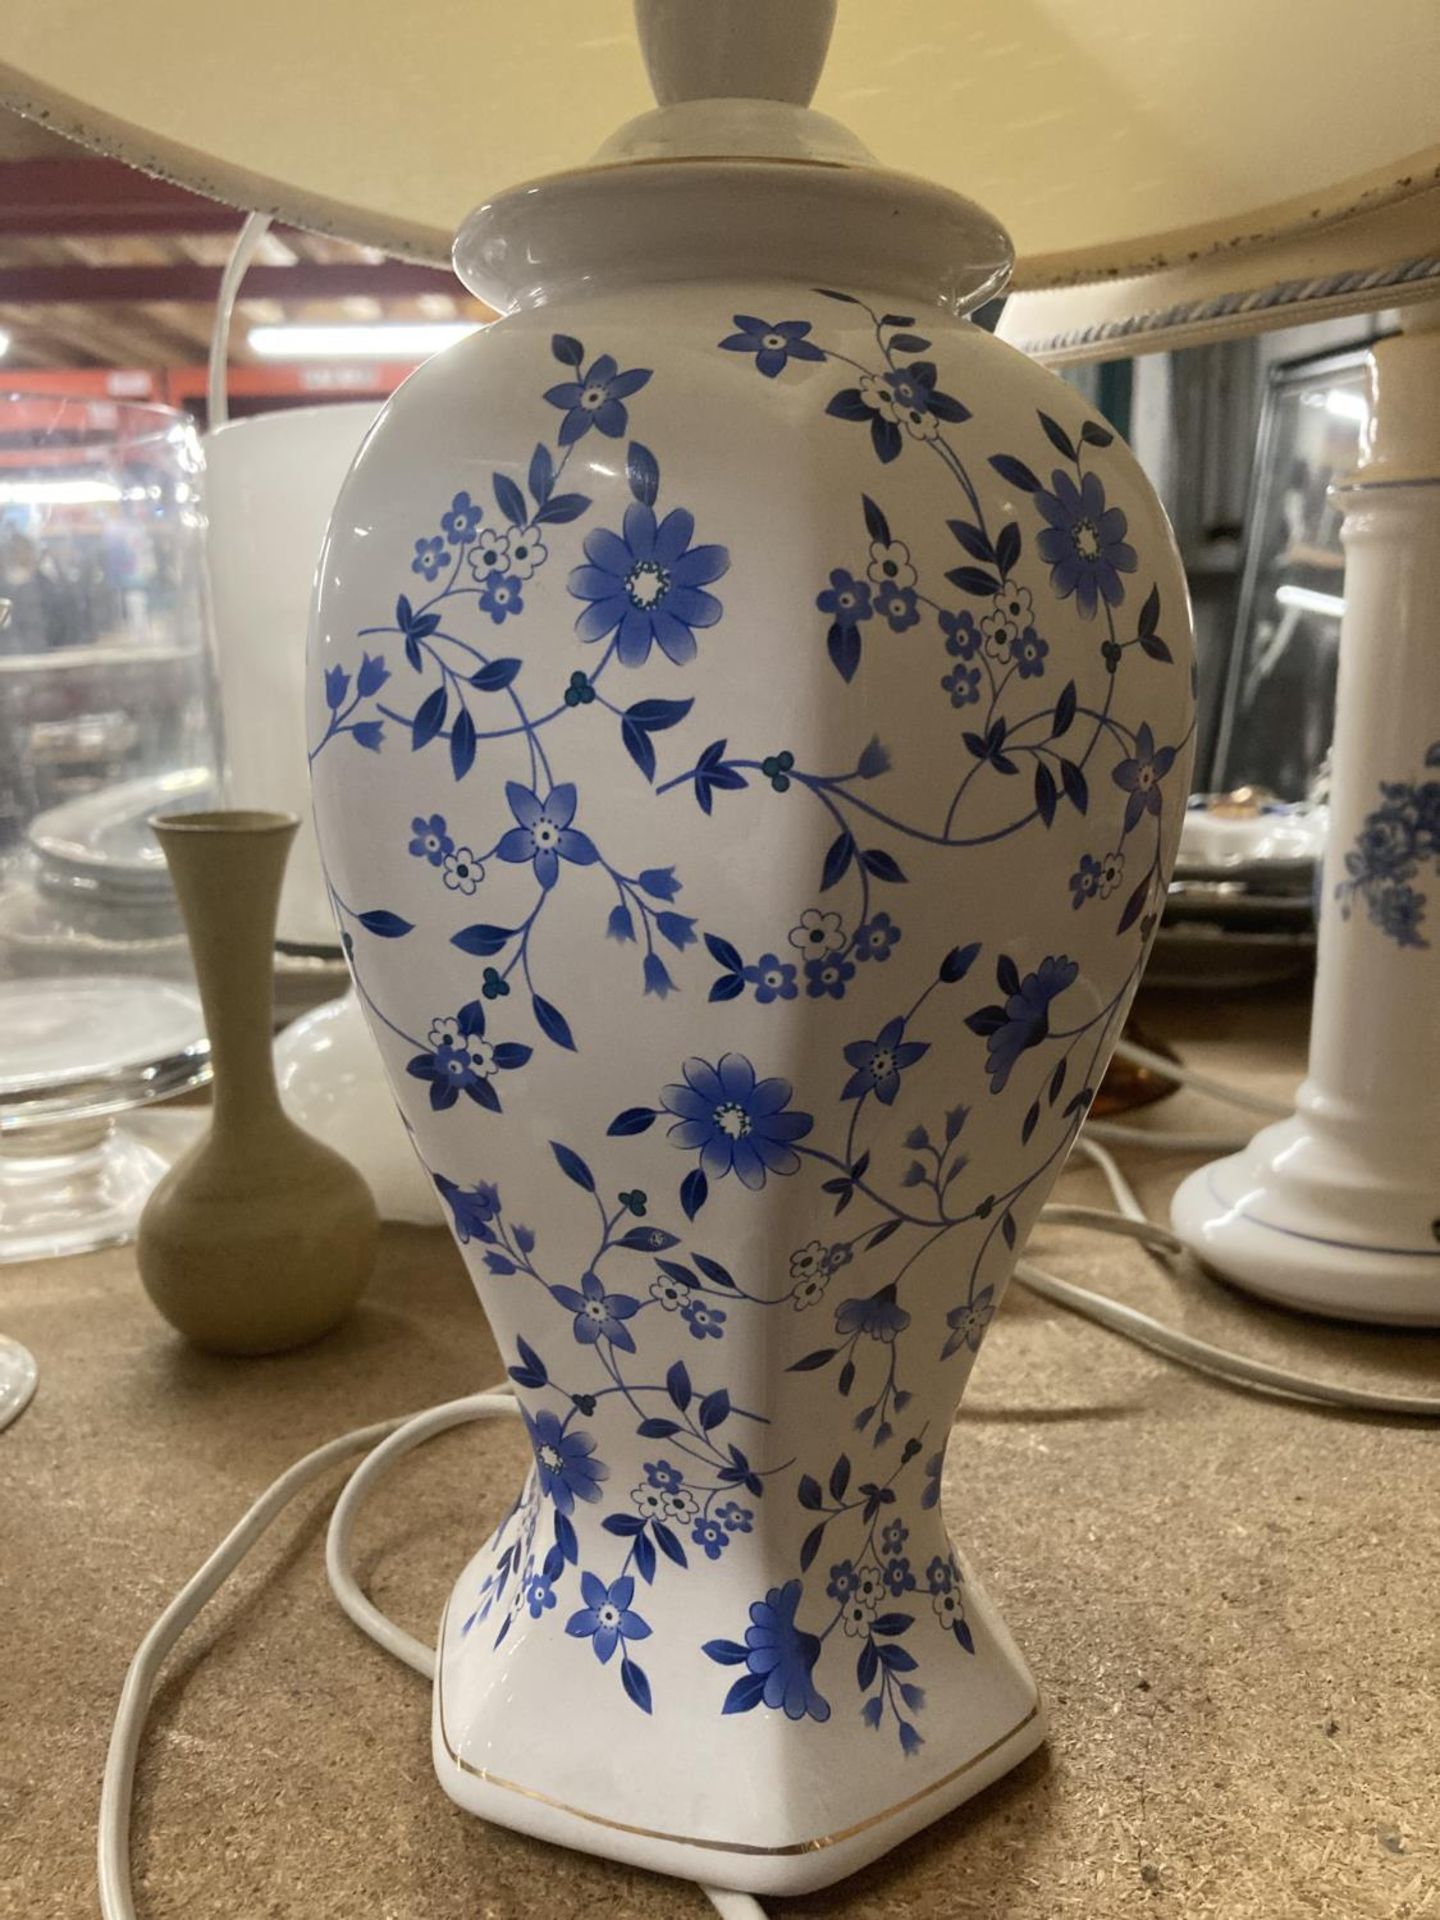 TWO CERAMIC BLUE AND WHITE FLORAL LAMPS WITH CREAM AND BLUE AND WHITE TRIM SHADES - Image 2 of 3